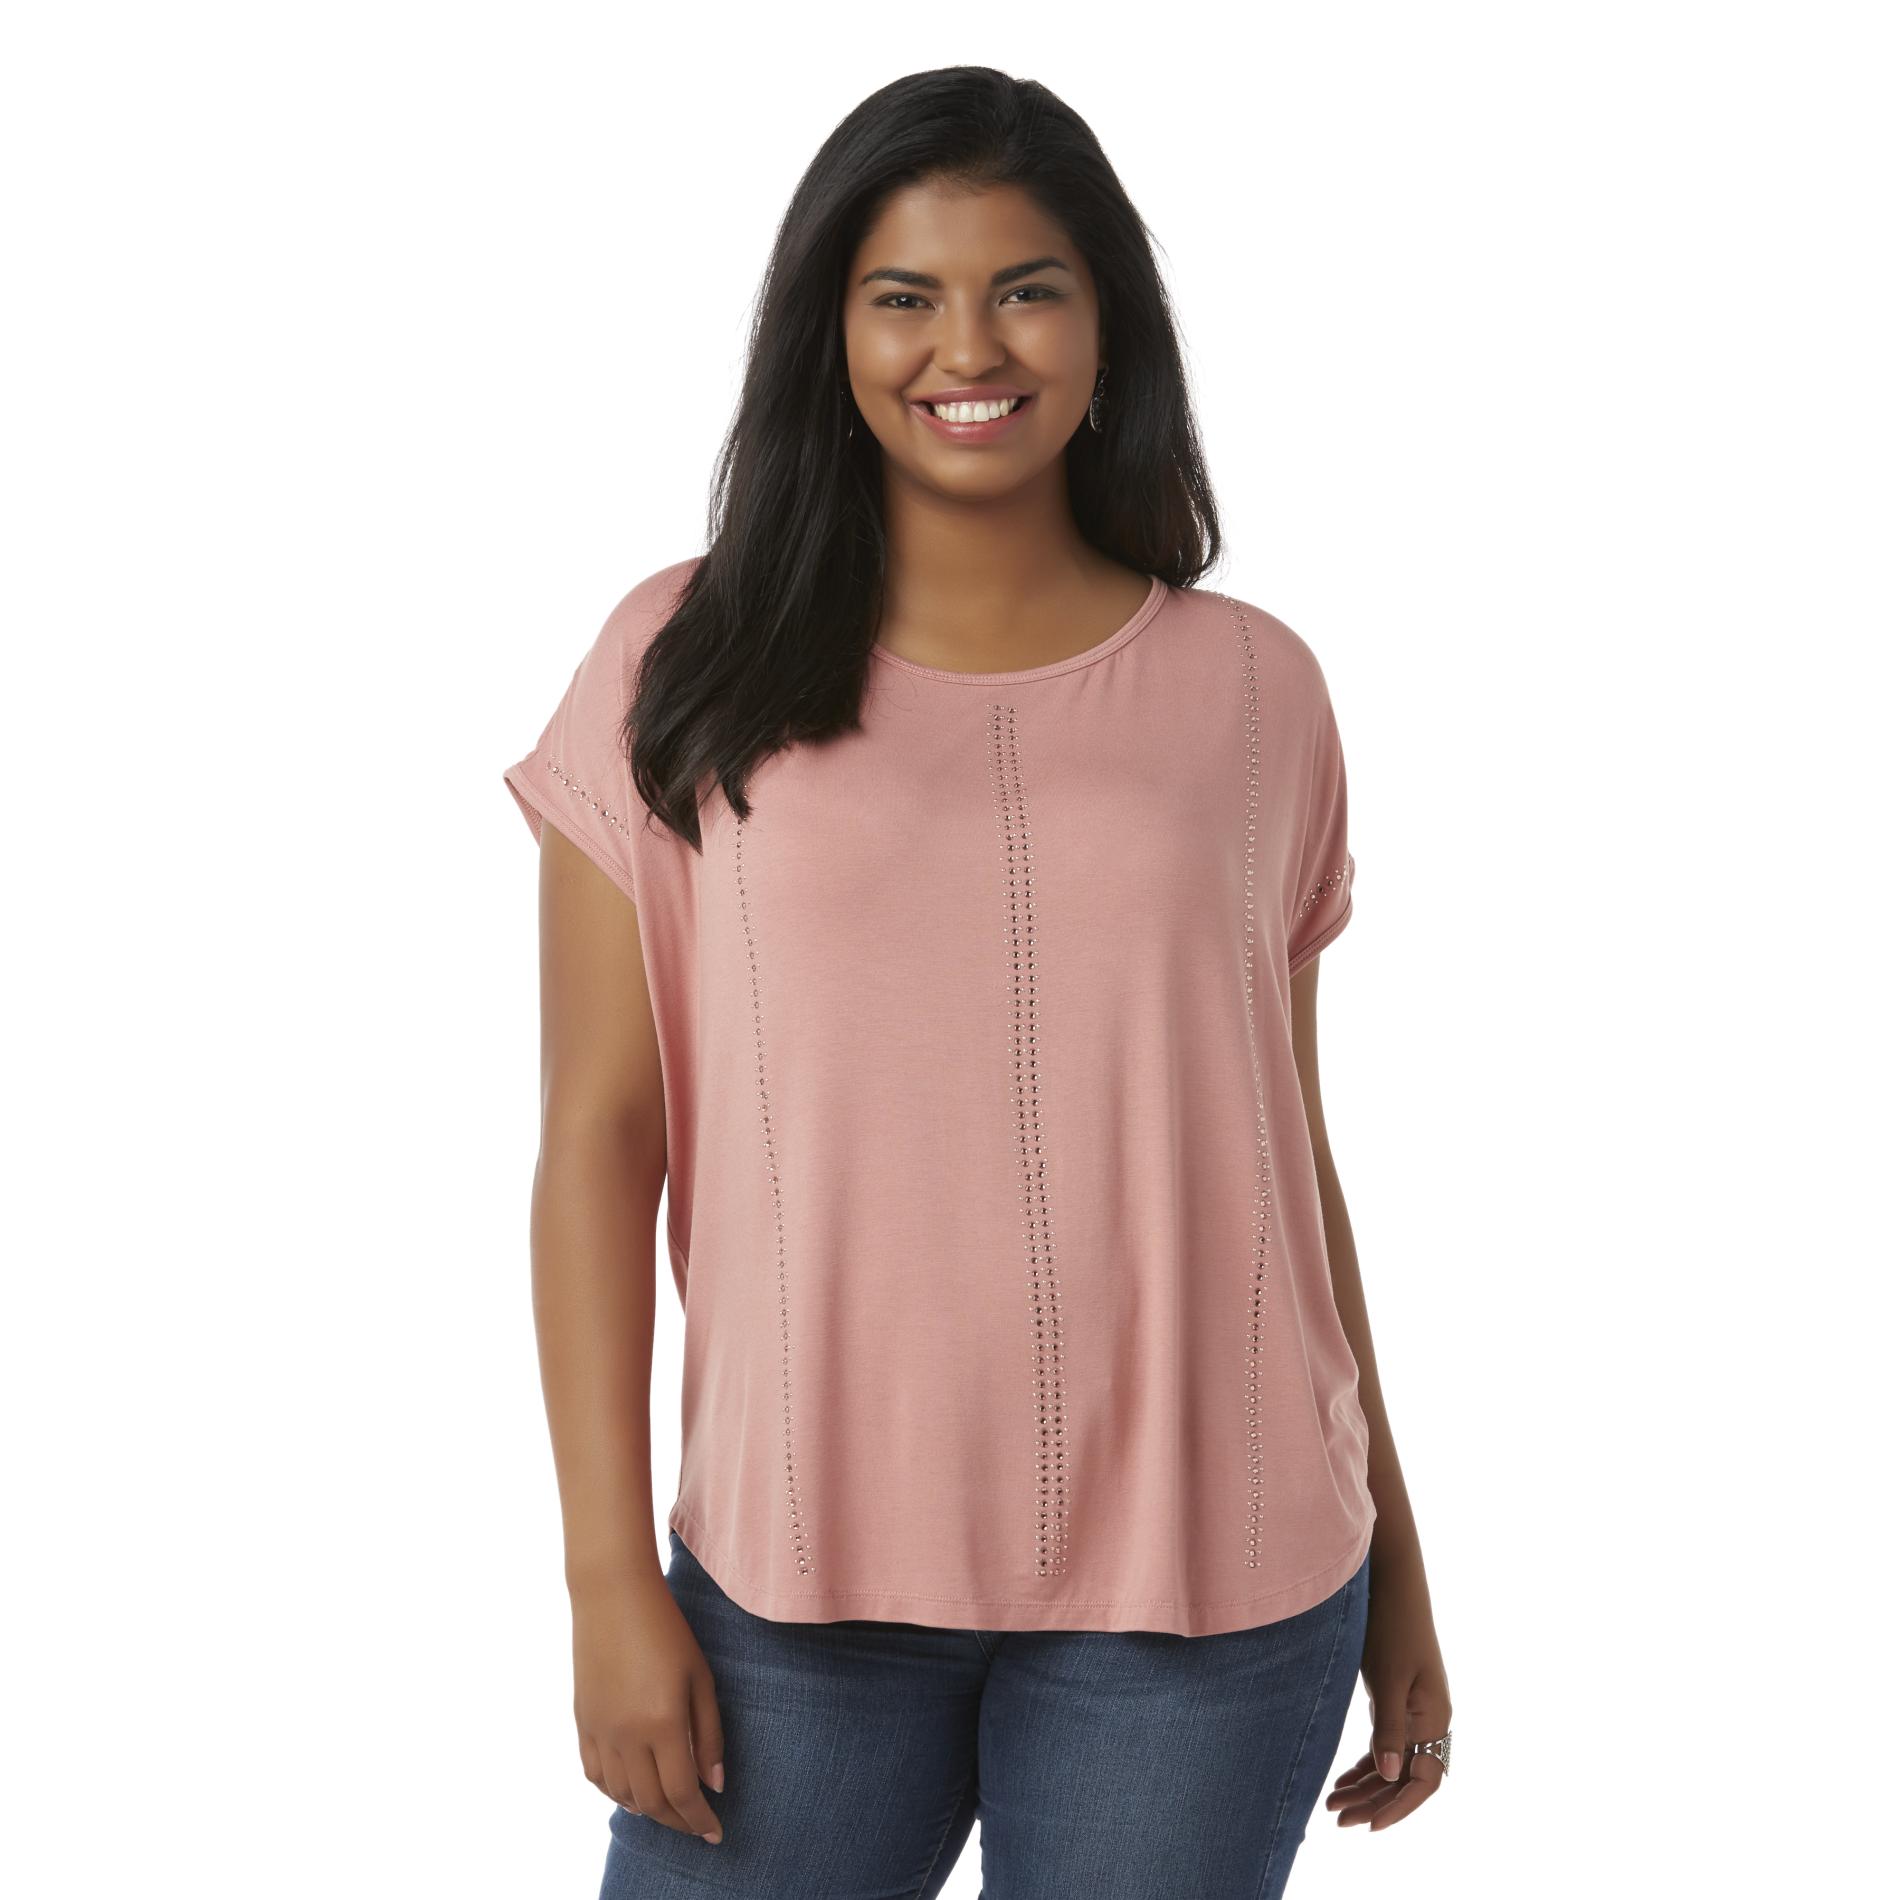 Simply Emma Women's Plus Embellished Top